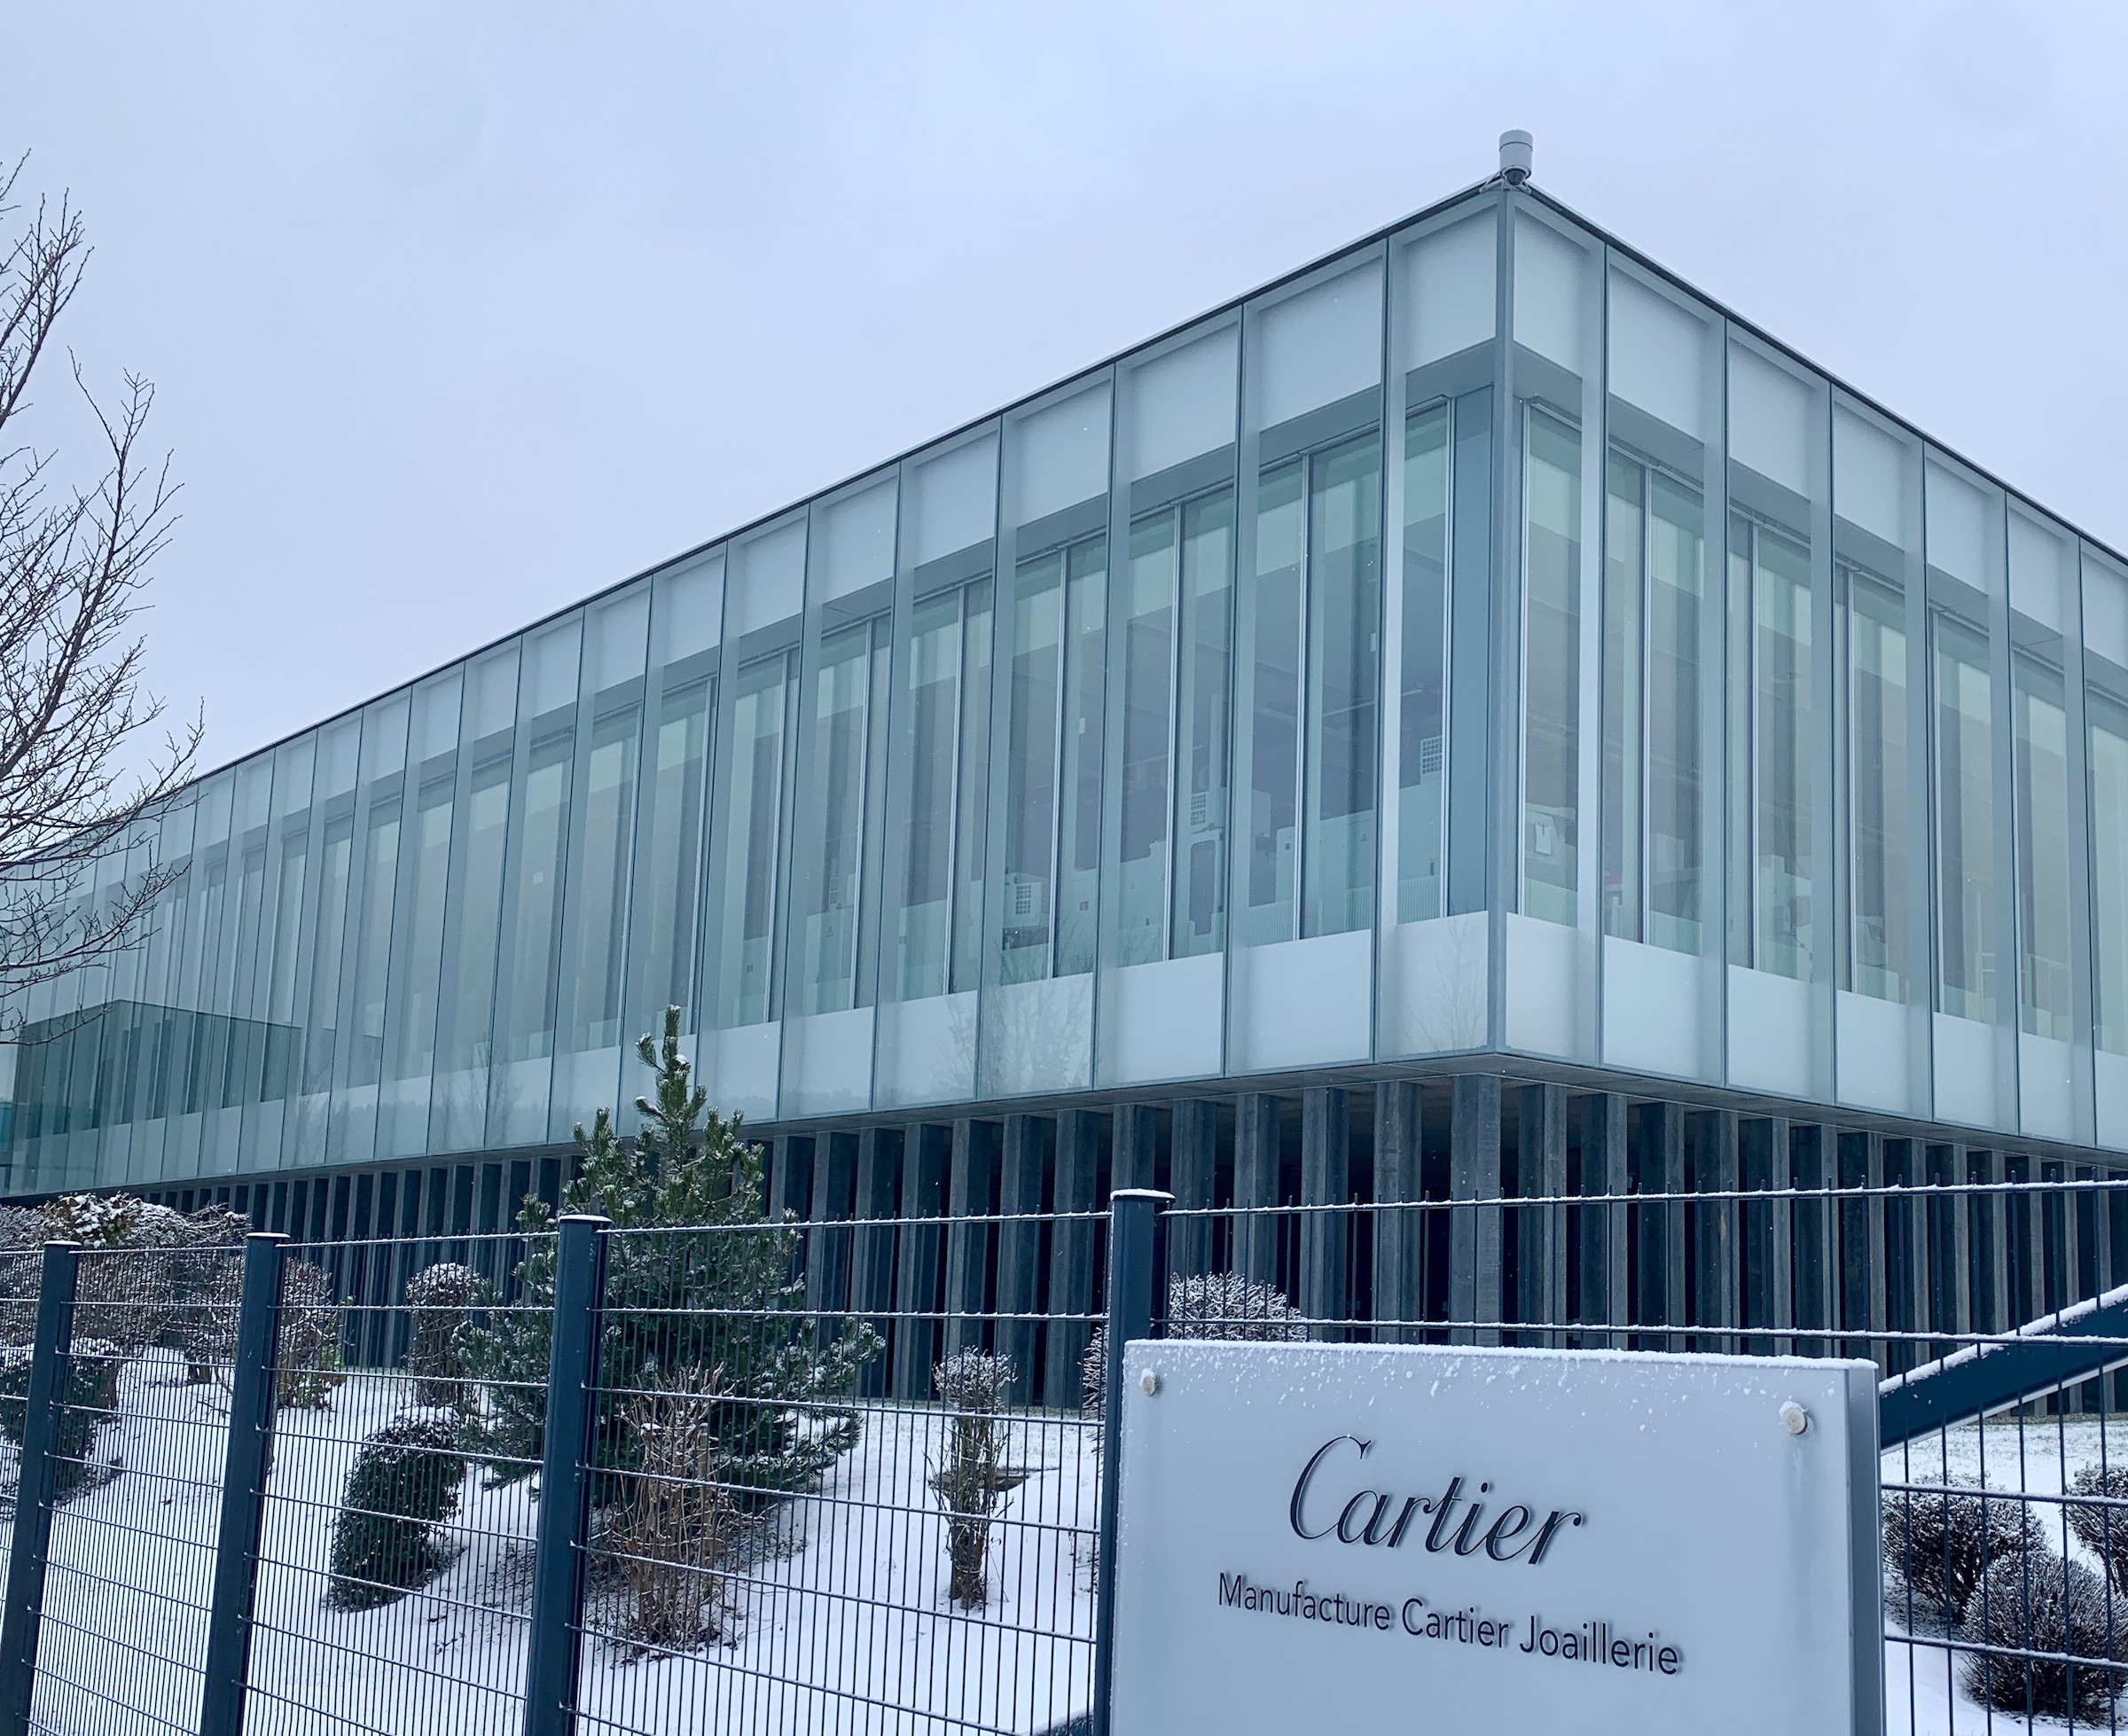 Building of the watch brand Cartier in Le Locle